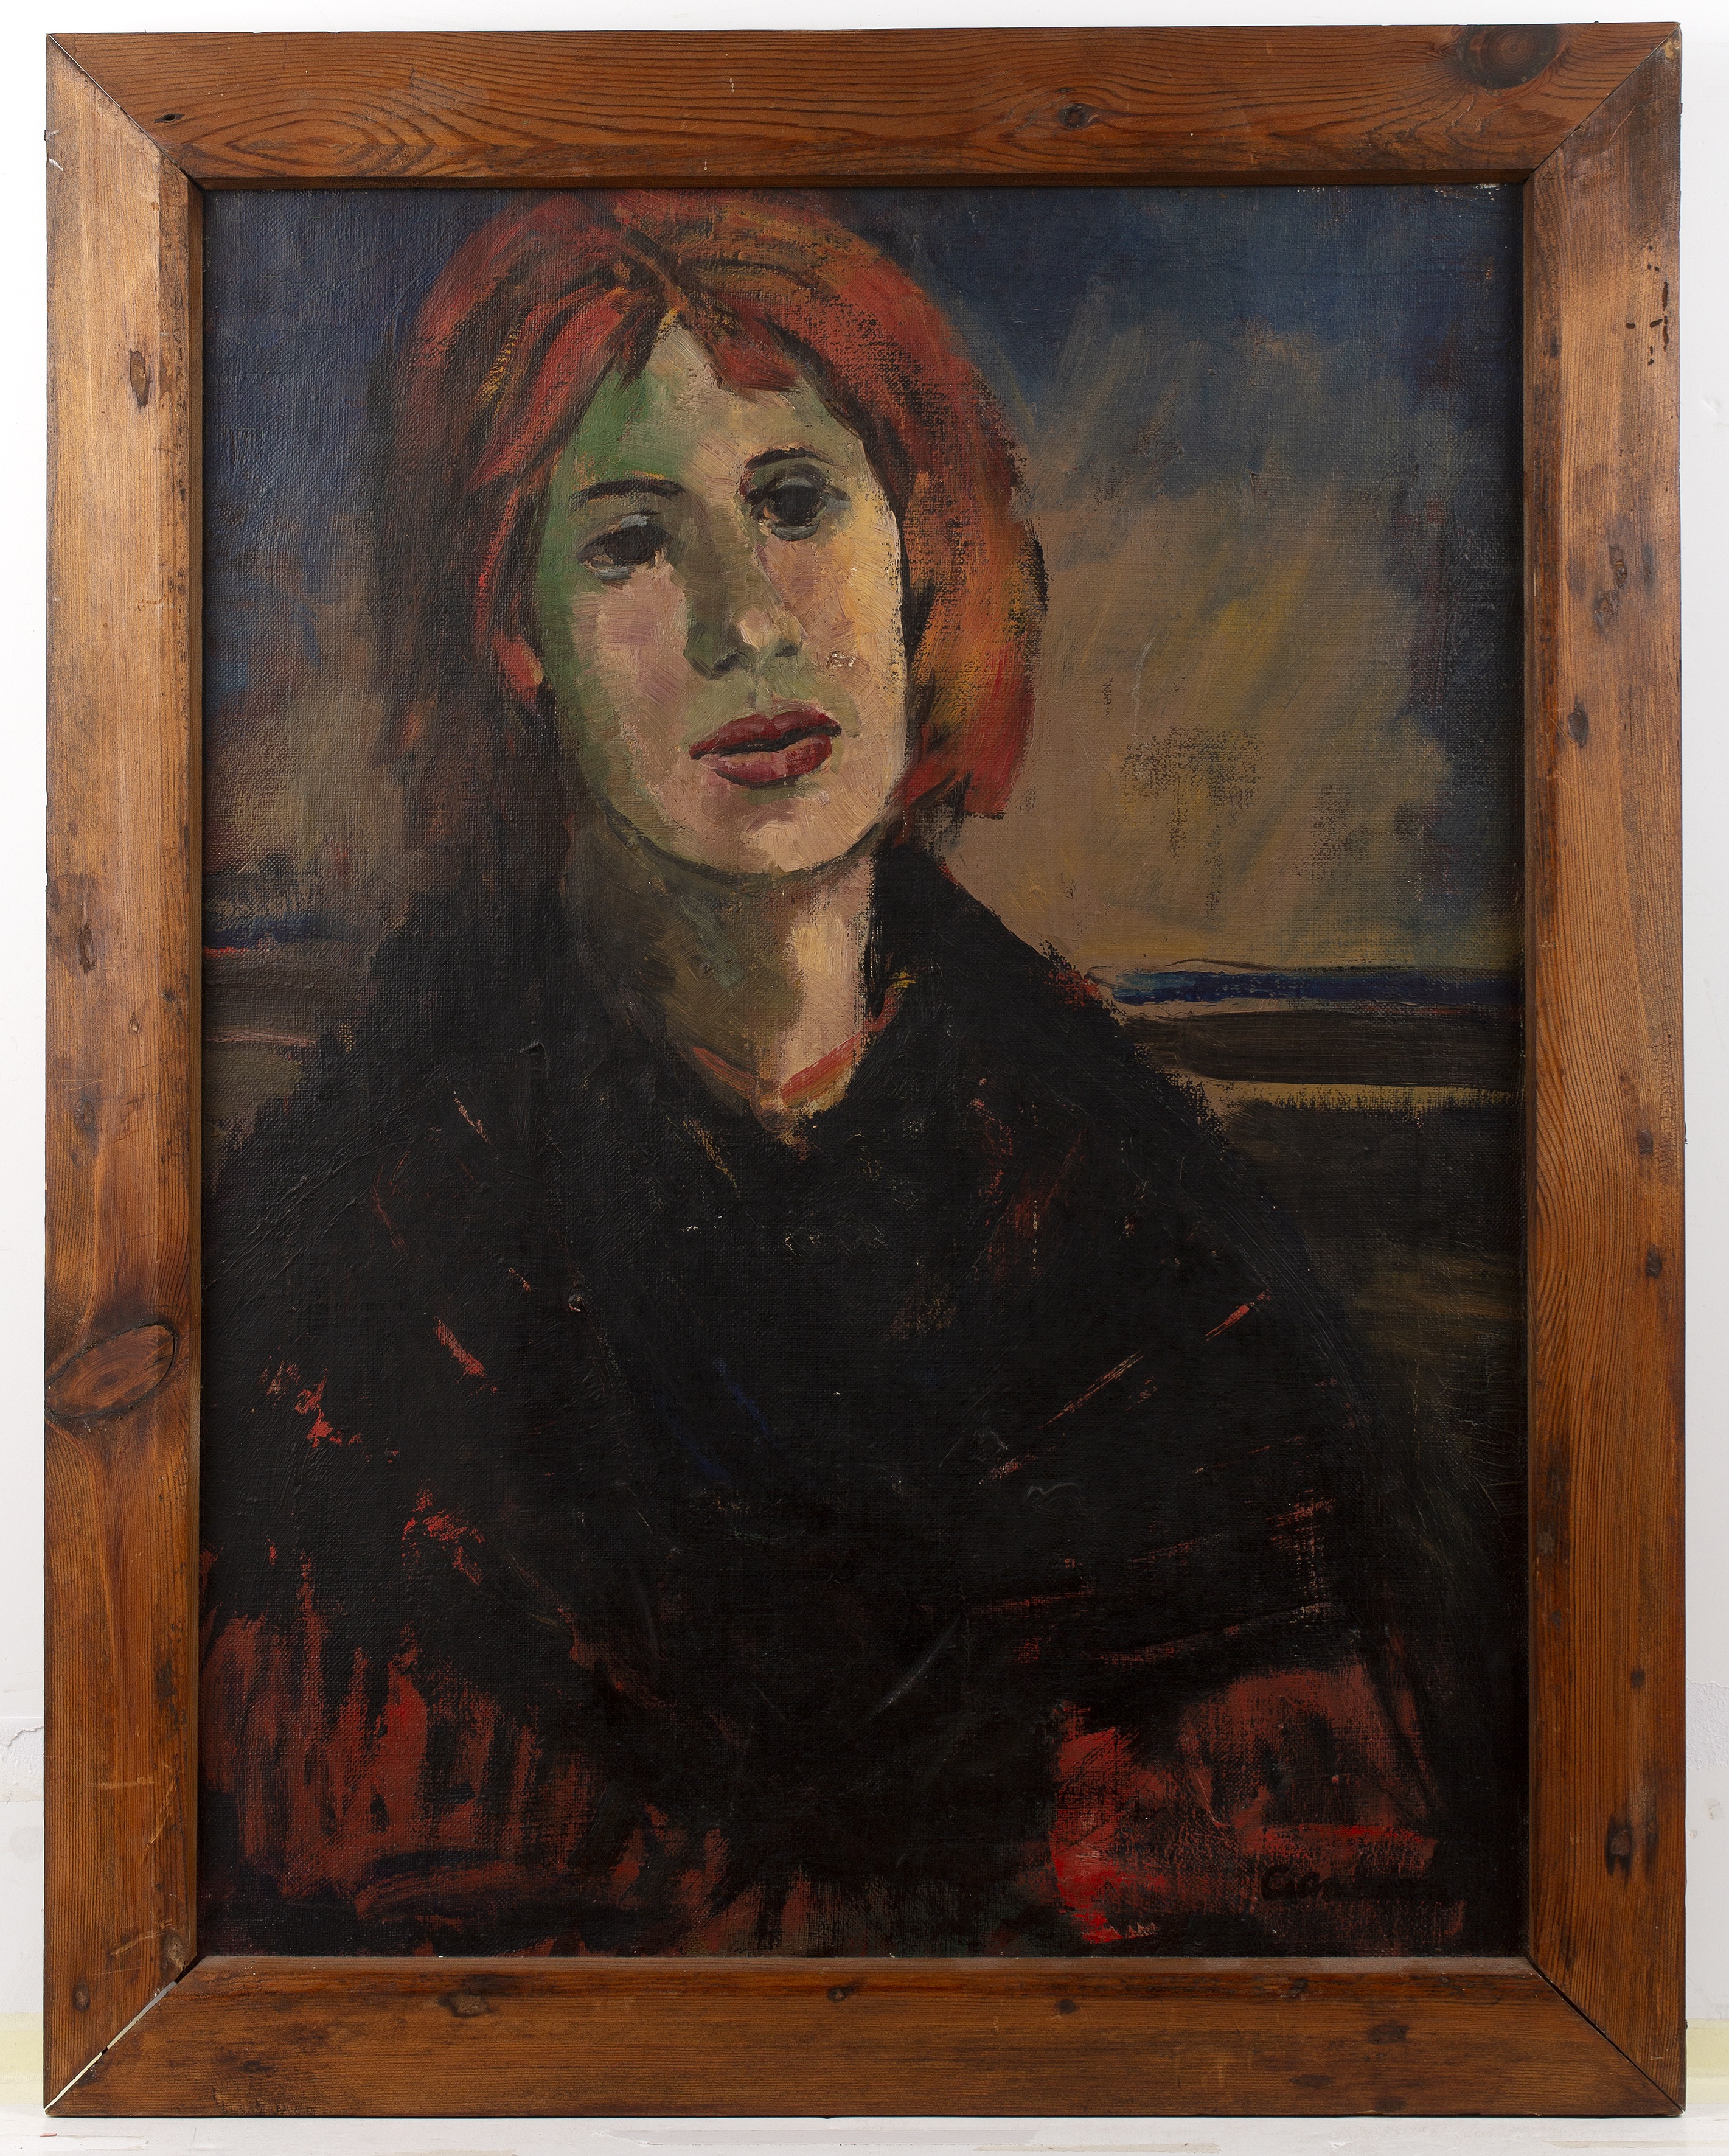 Reginald William 'Reg' Gammon (1894-1997) 'Girl with red hair', oil on canvas, signed and dated 1965 - Image 2 of 3